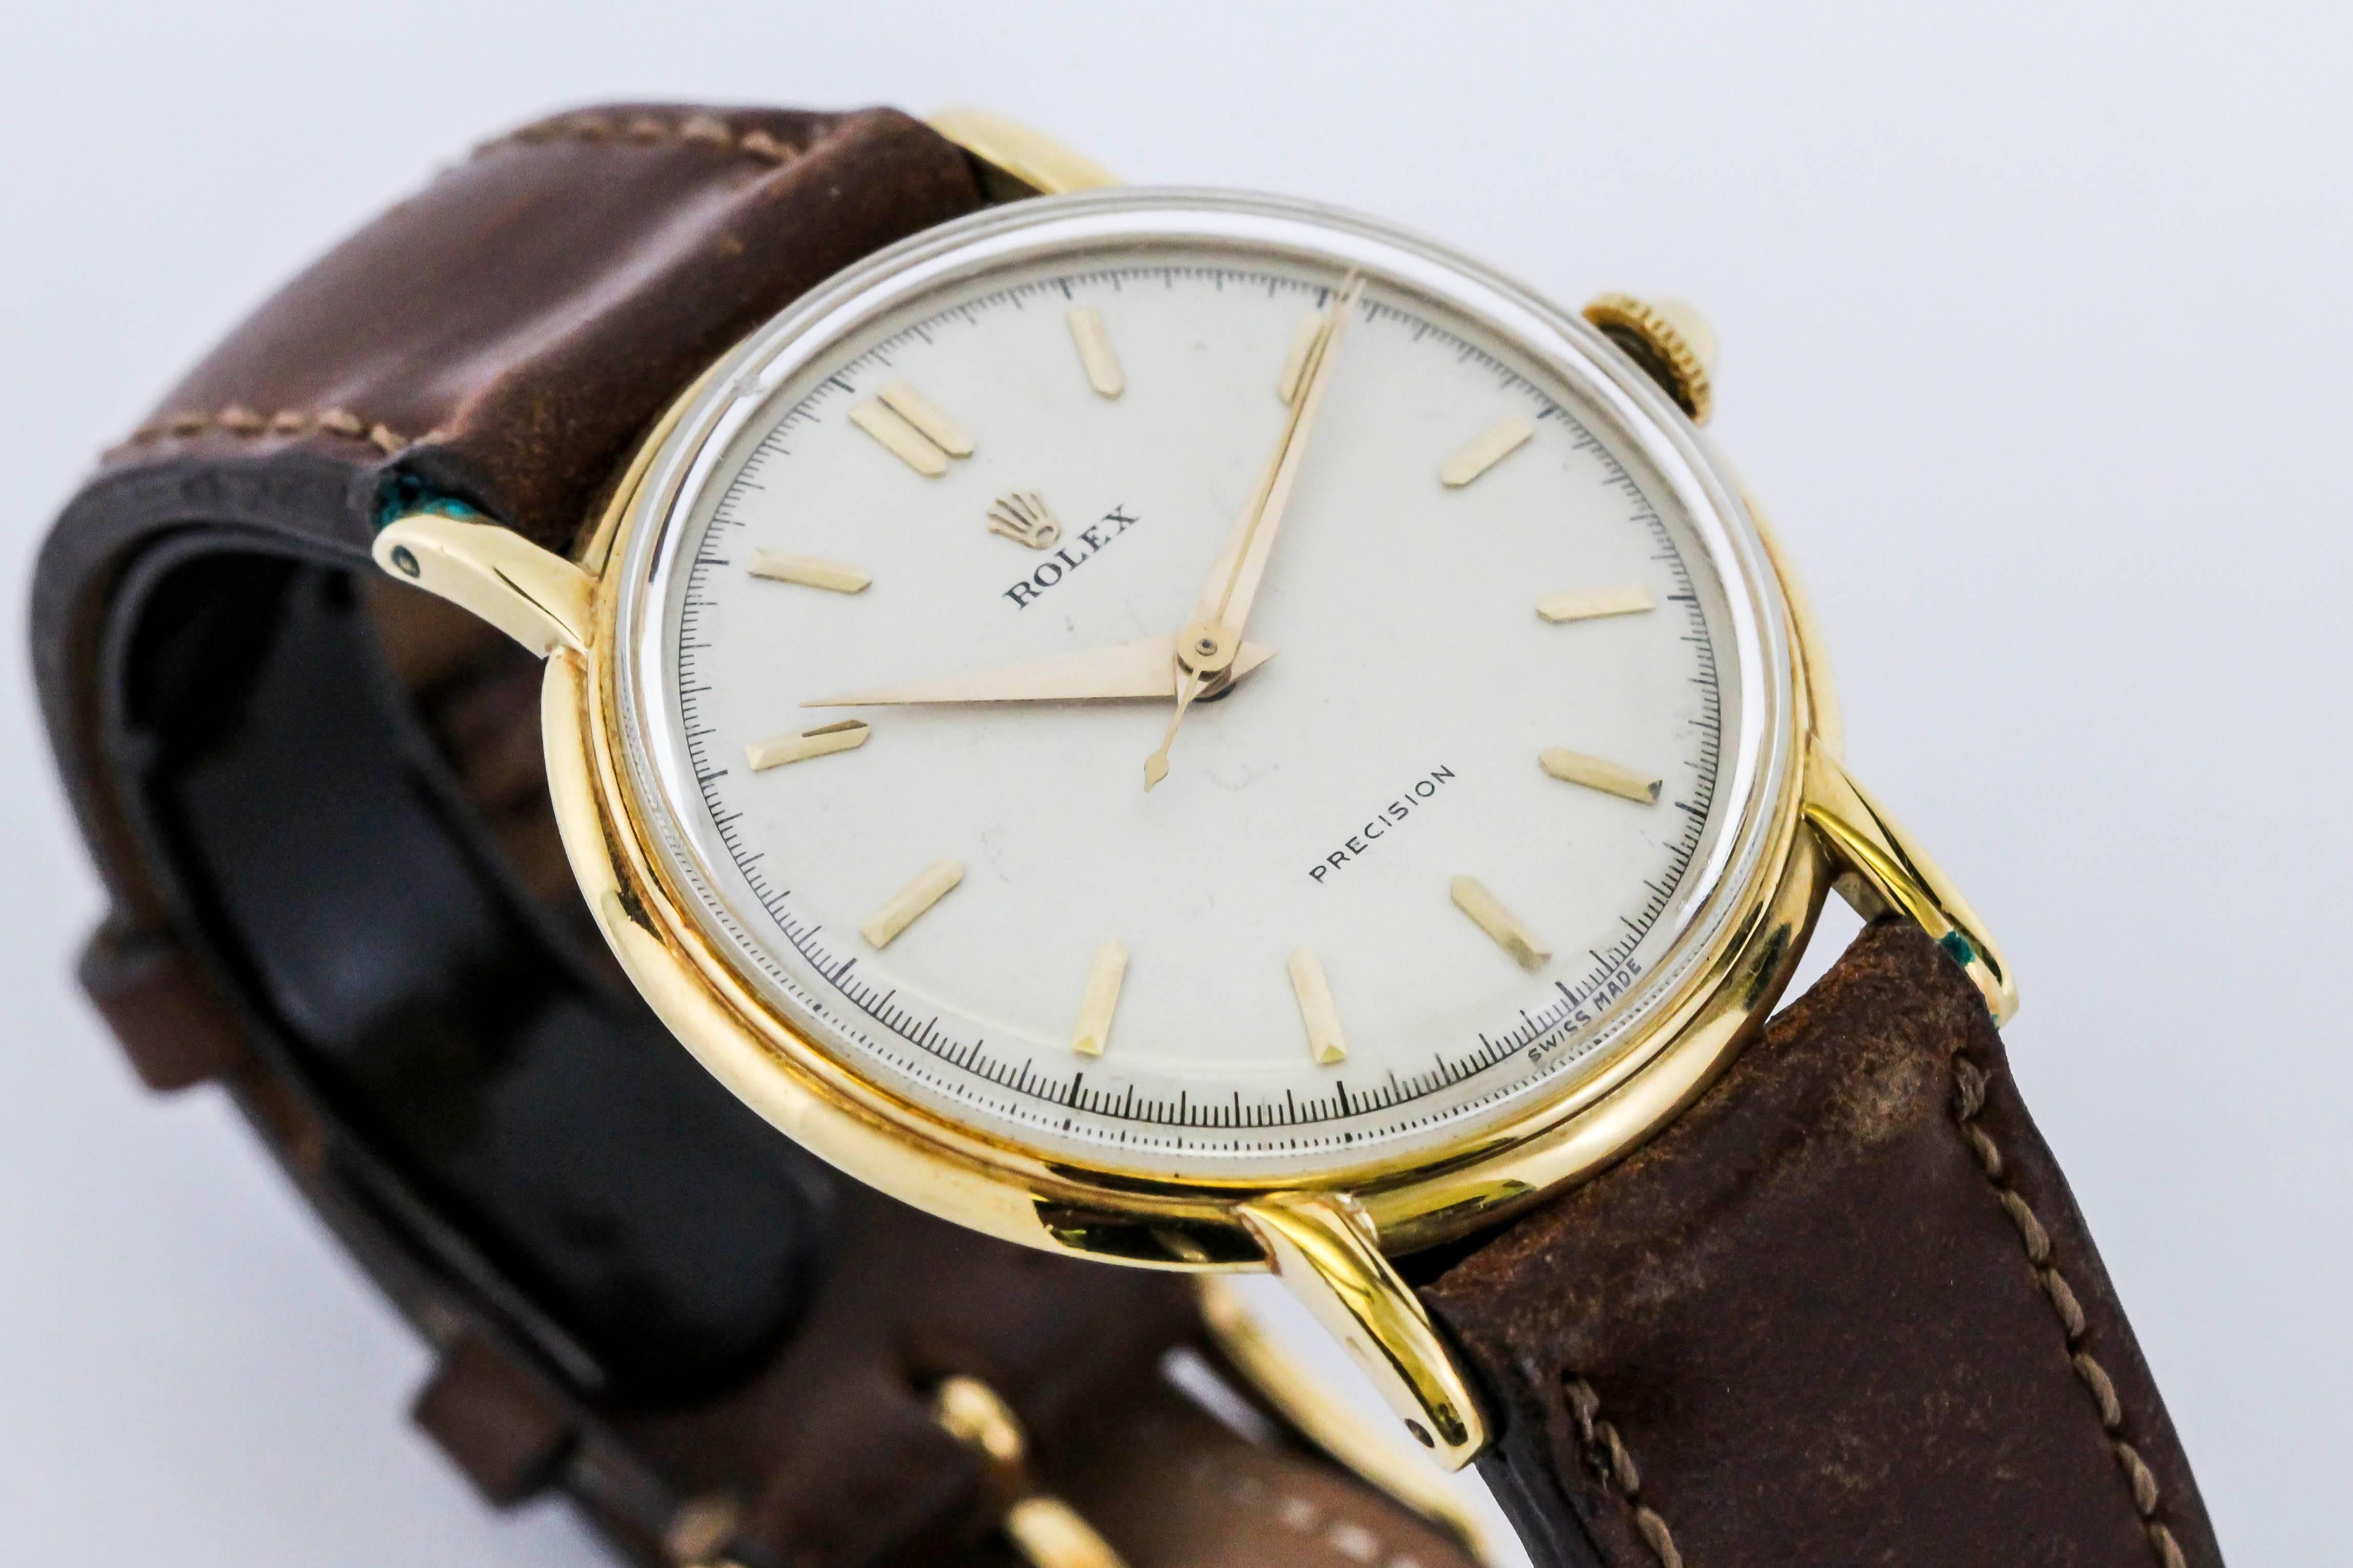 Brand: Rolex
Model: Precision
Ref: 4222
Year: 190s
Material: 18k Yellow Gold
Dial:  Original Ivory with applied Pointy Markers
Dimensions: 35mm 
Watch Movement: Manual Wind
Bracelet/Strap: Brown Cordovan Leather
Box/Paper: No